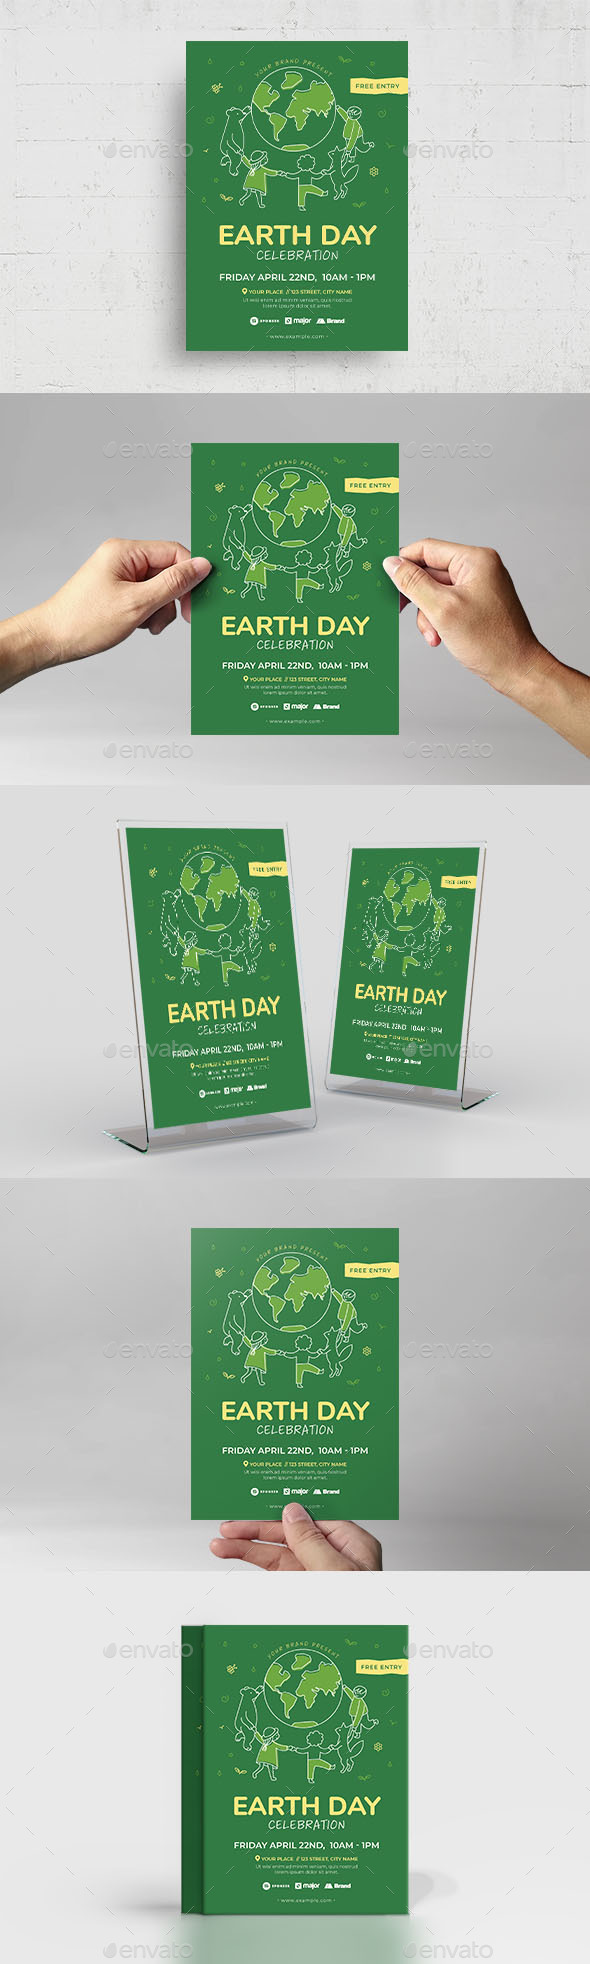 Simple Earth Day Flyer Template